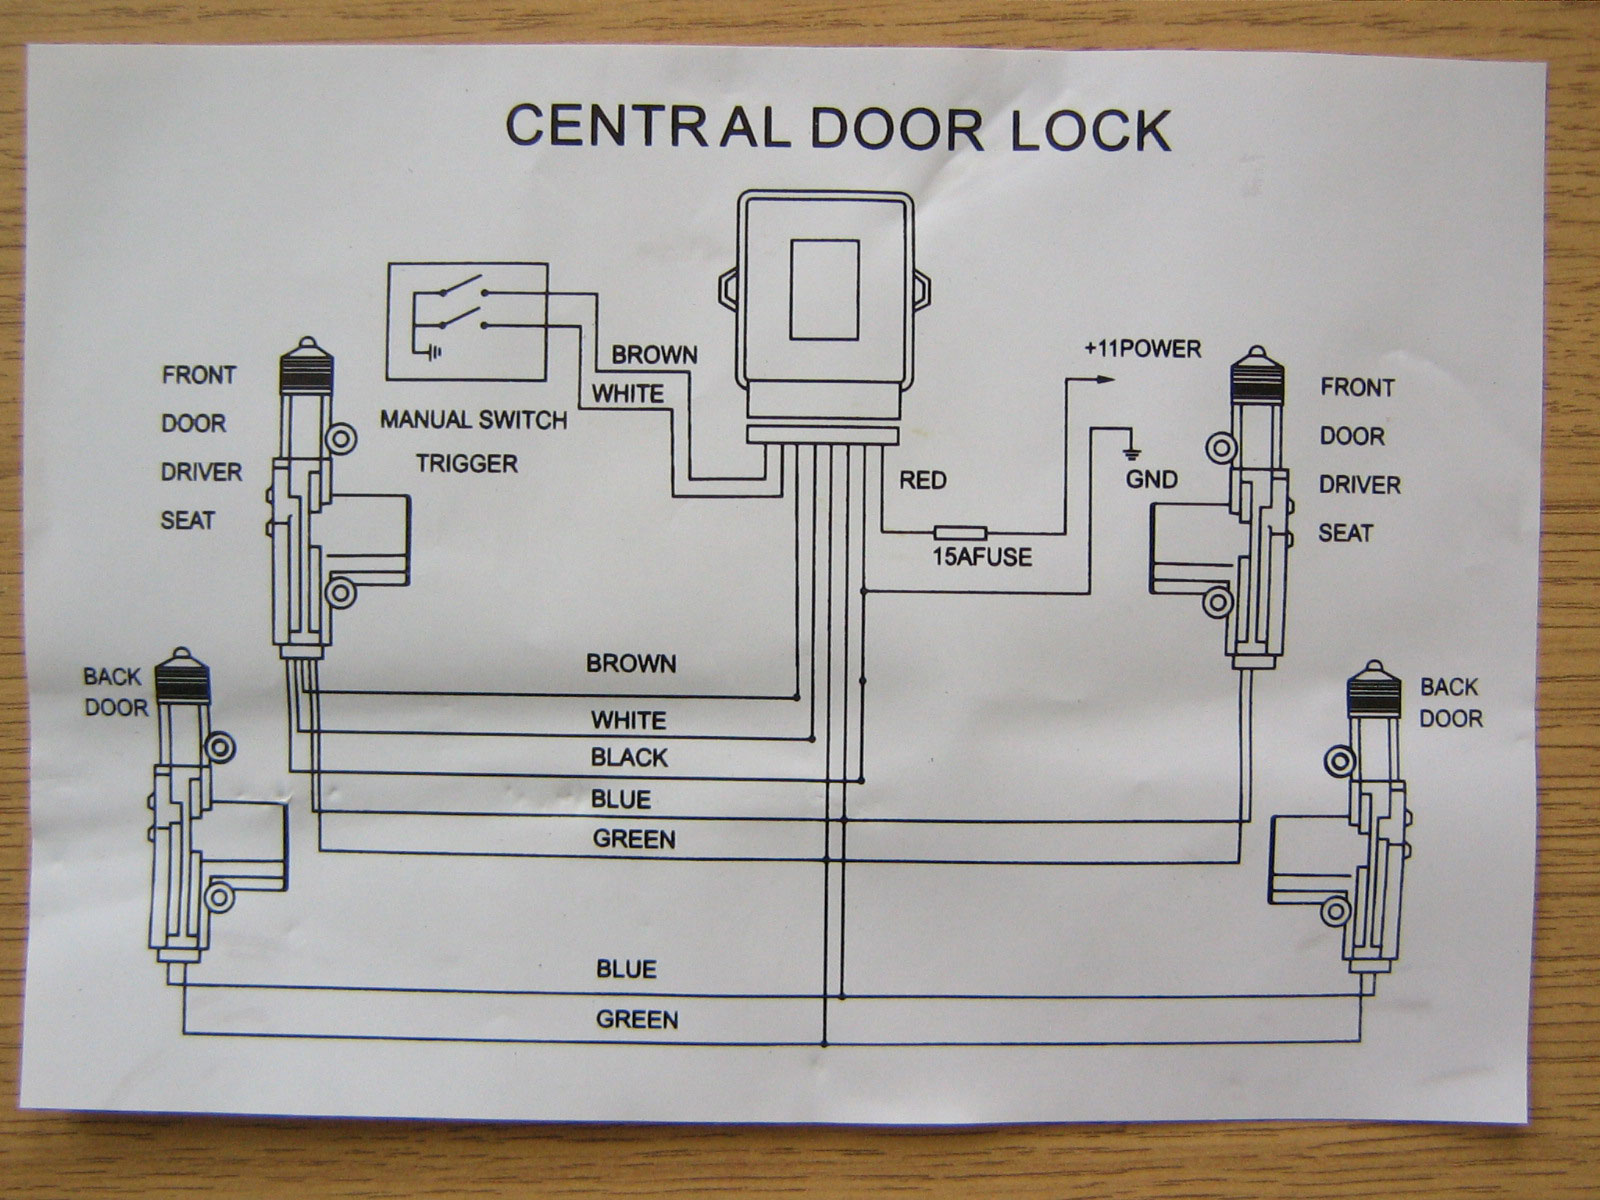 Universal Central Locking Kit System with 4 Actuators for 2 or 4 Door